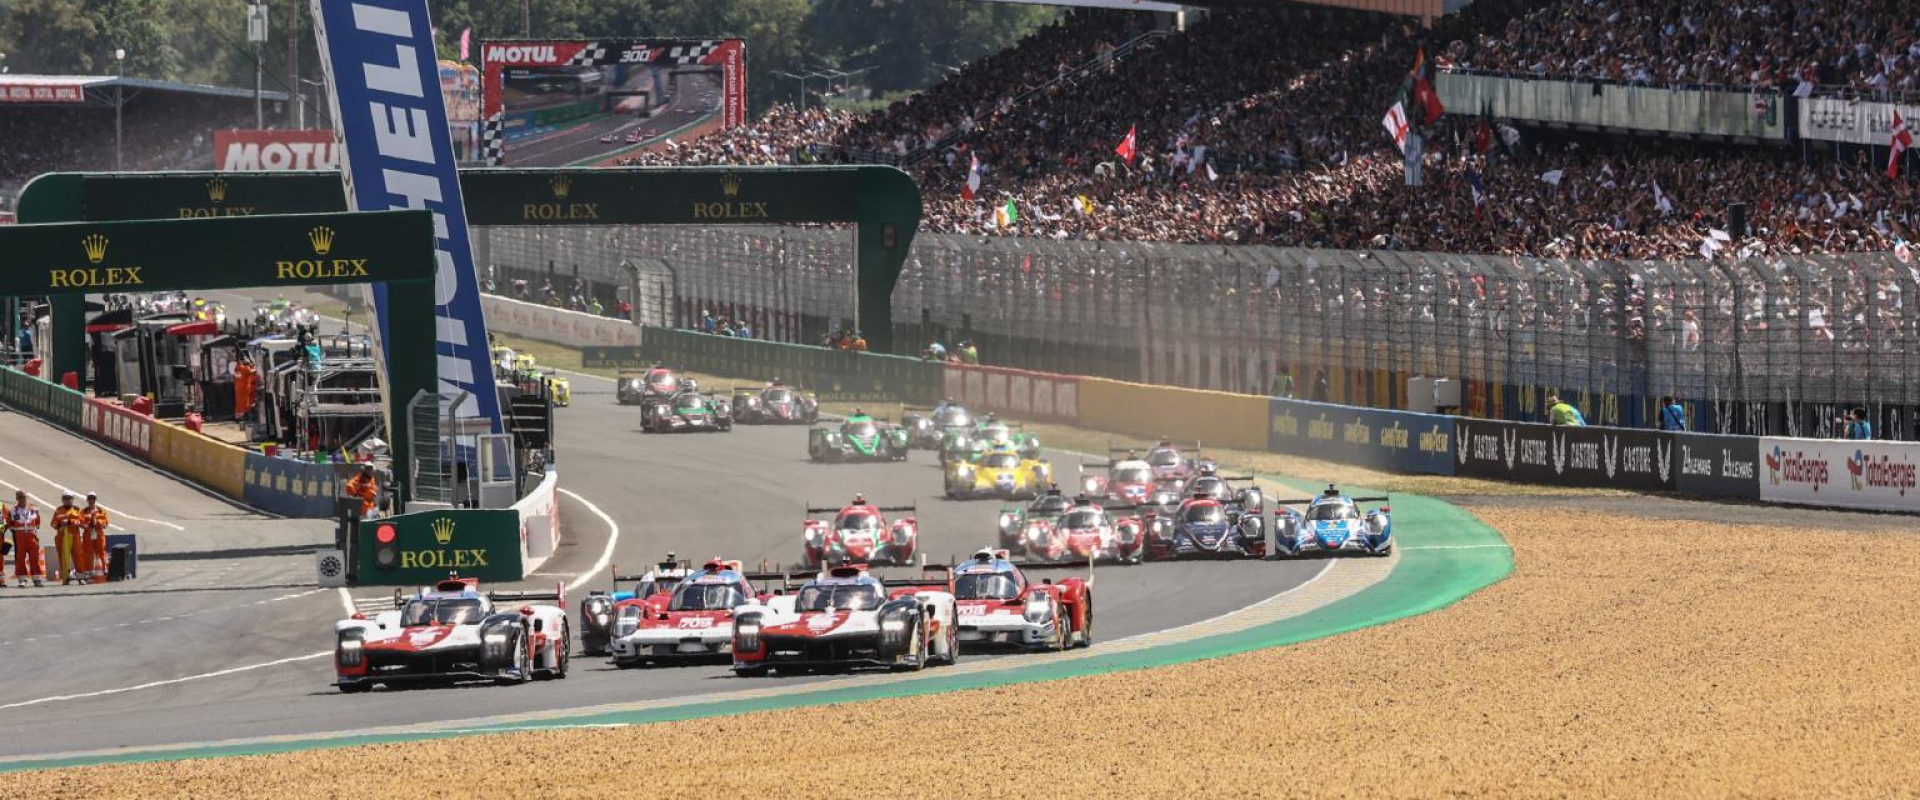 Start Your Engines: 24 Hours of Le Mans is Here 6